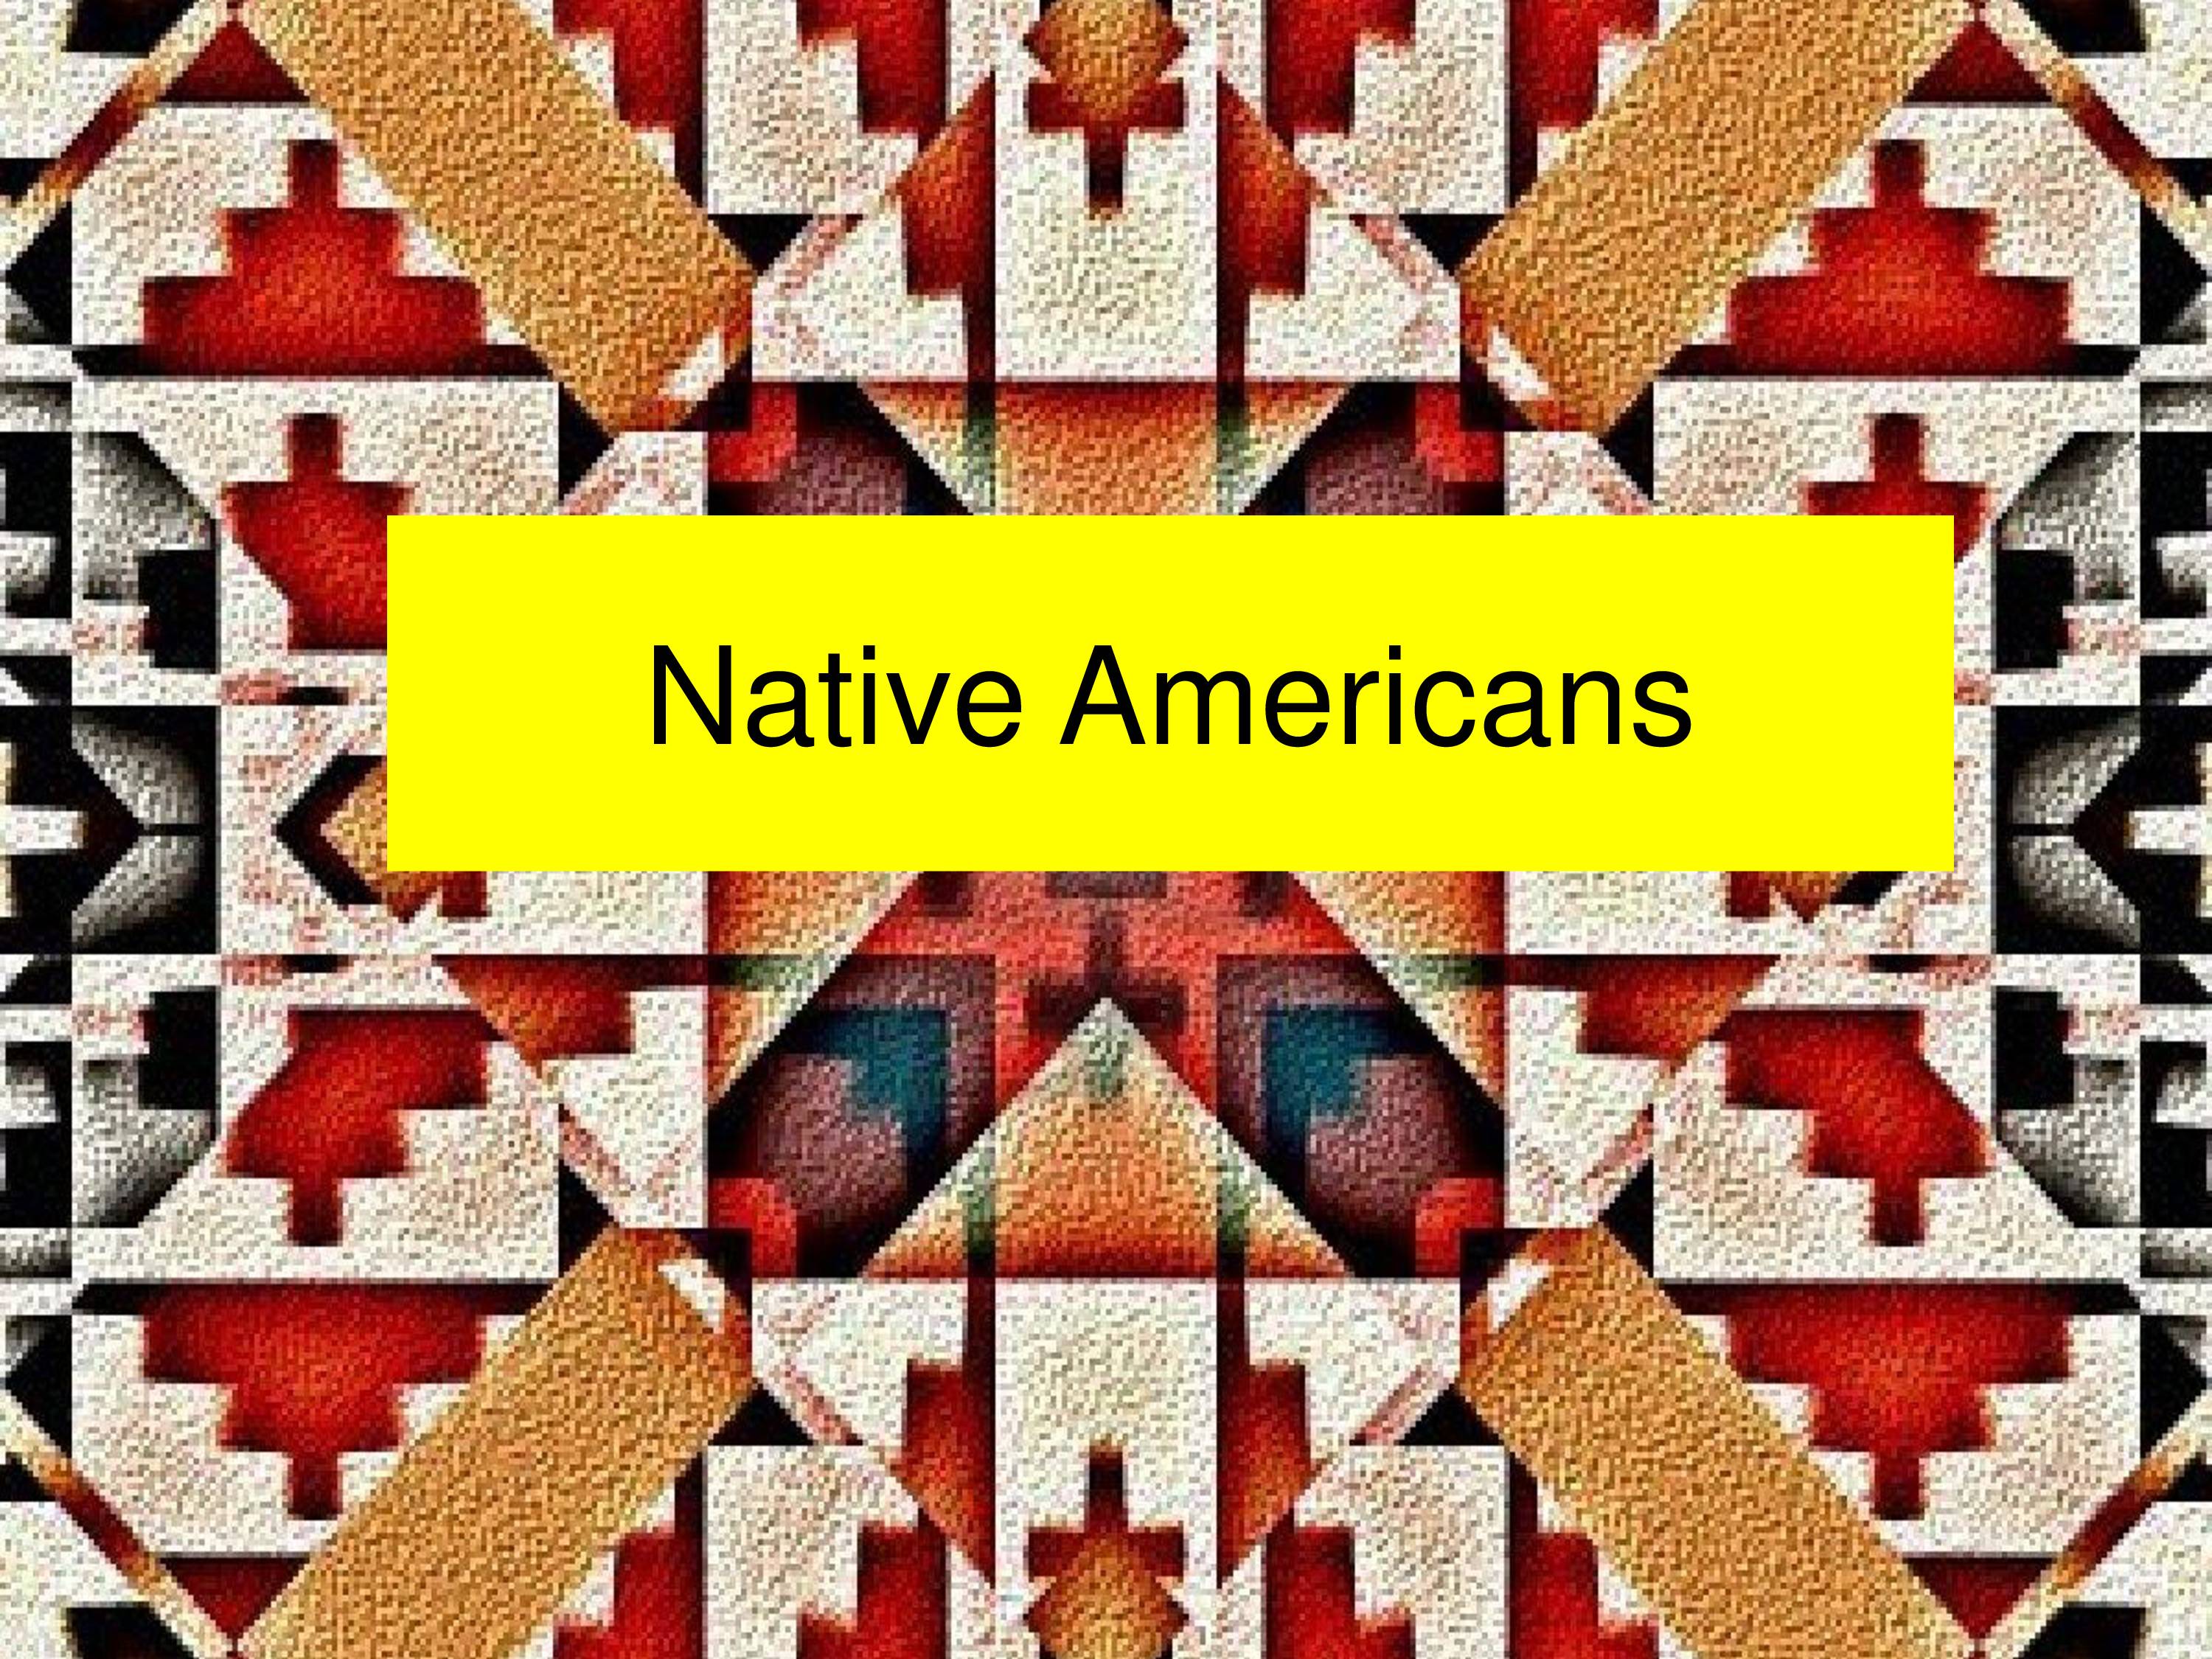 PPT on Lifestyle of Native Americans